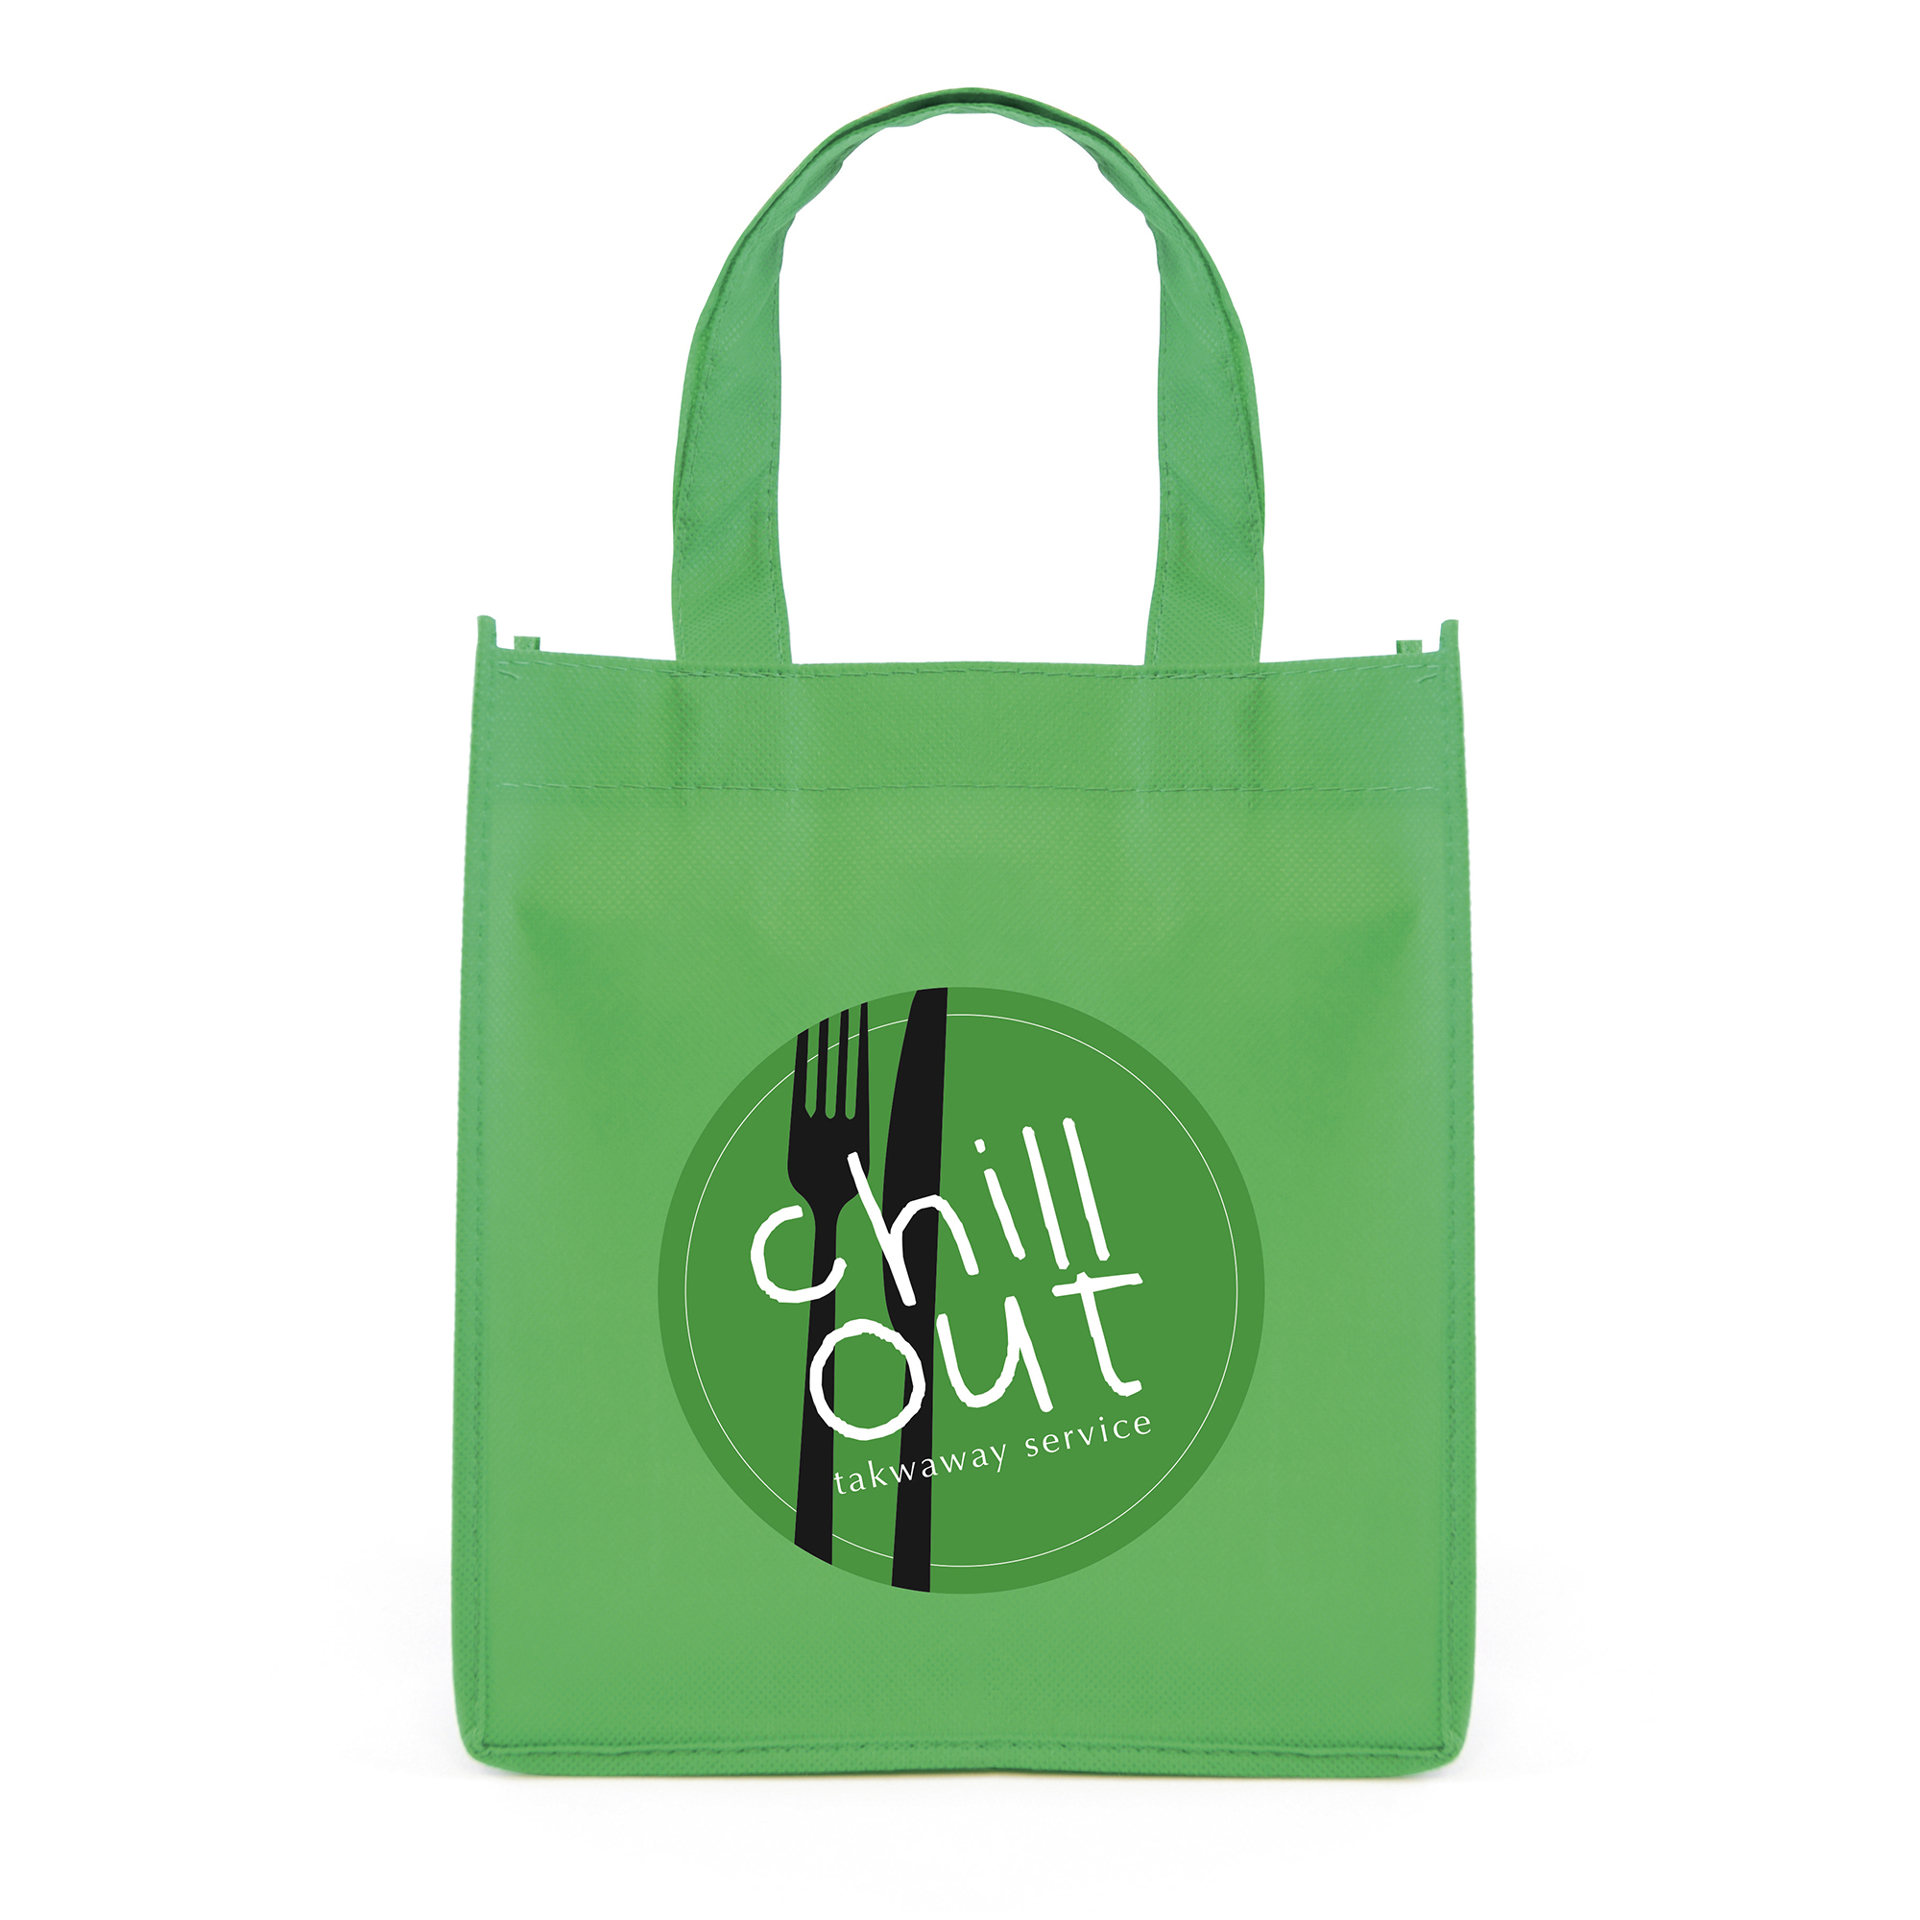 small green bag printed with a logo